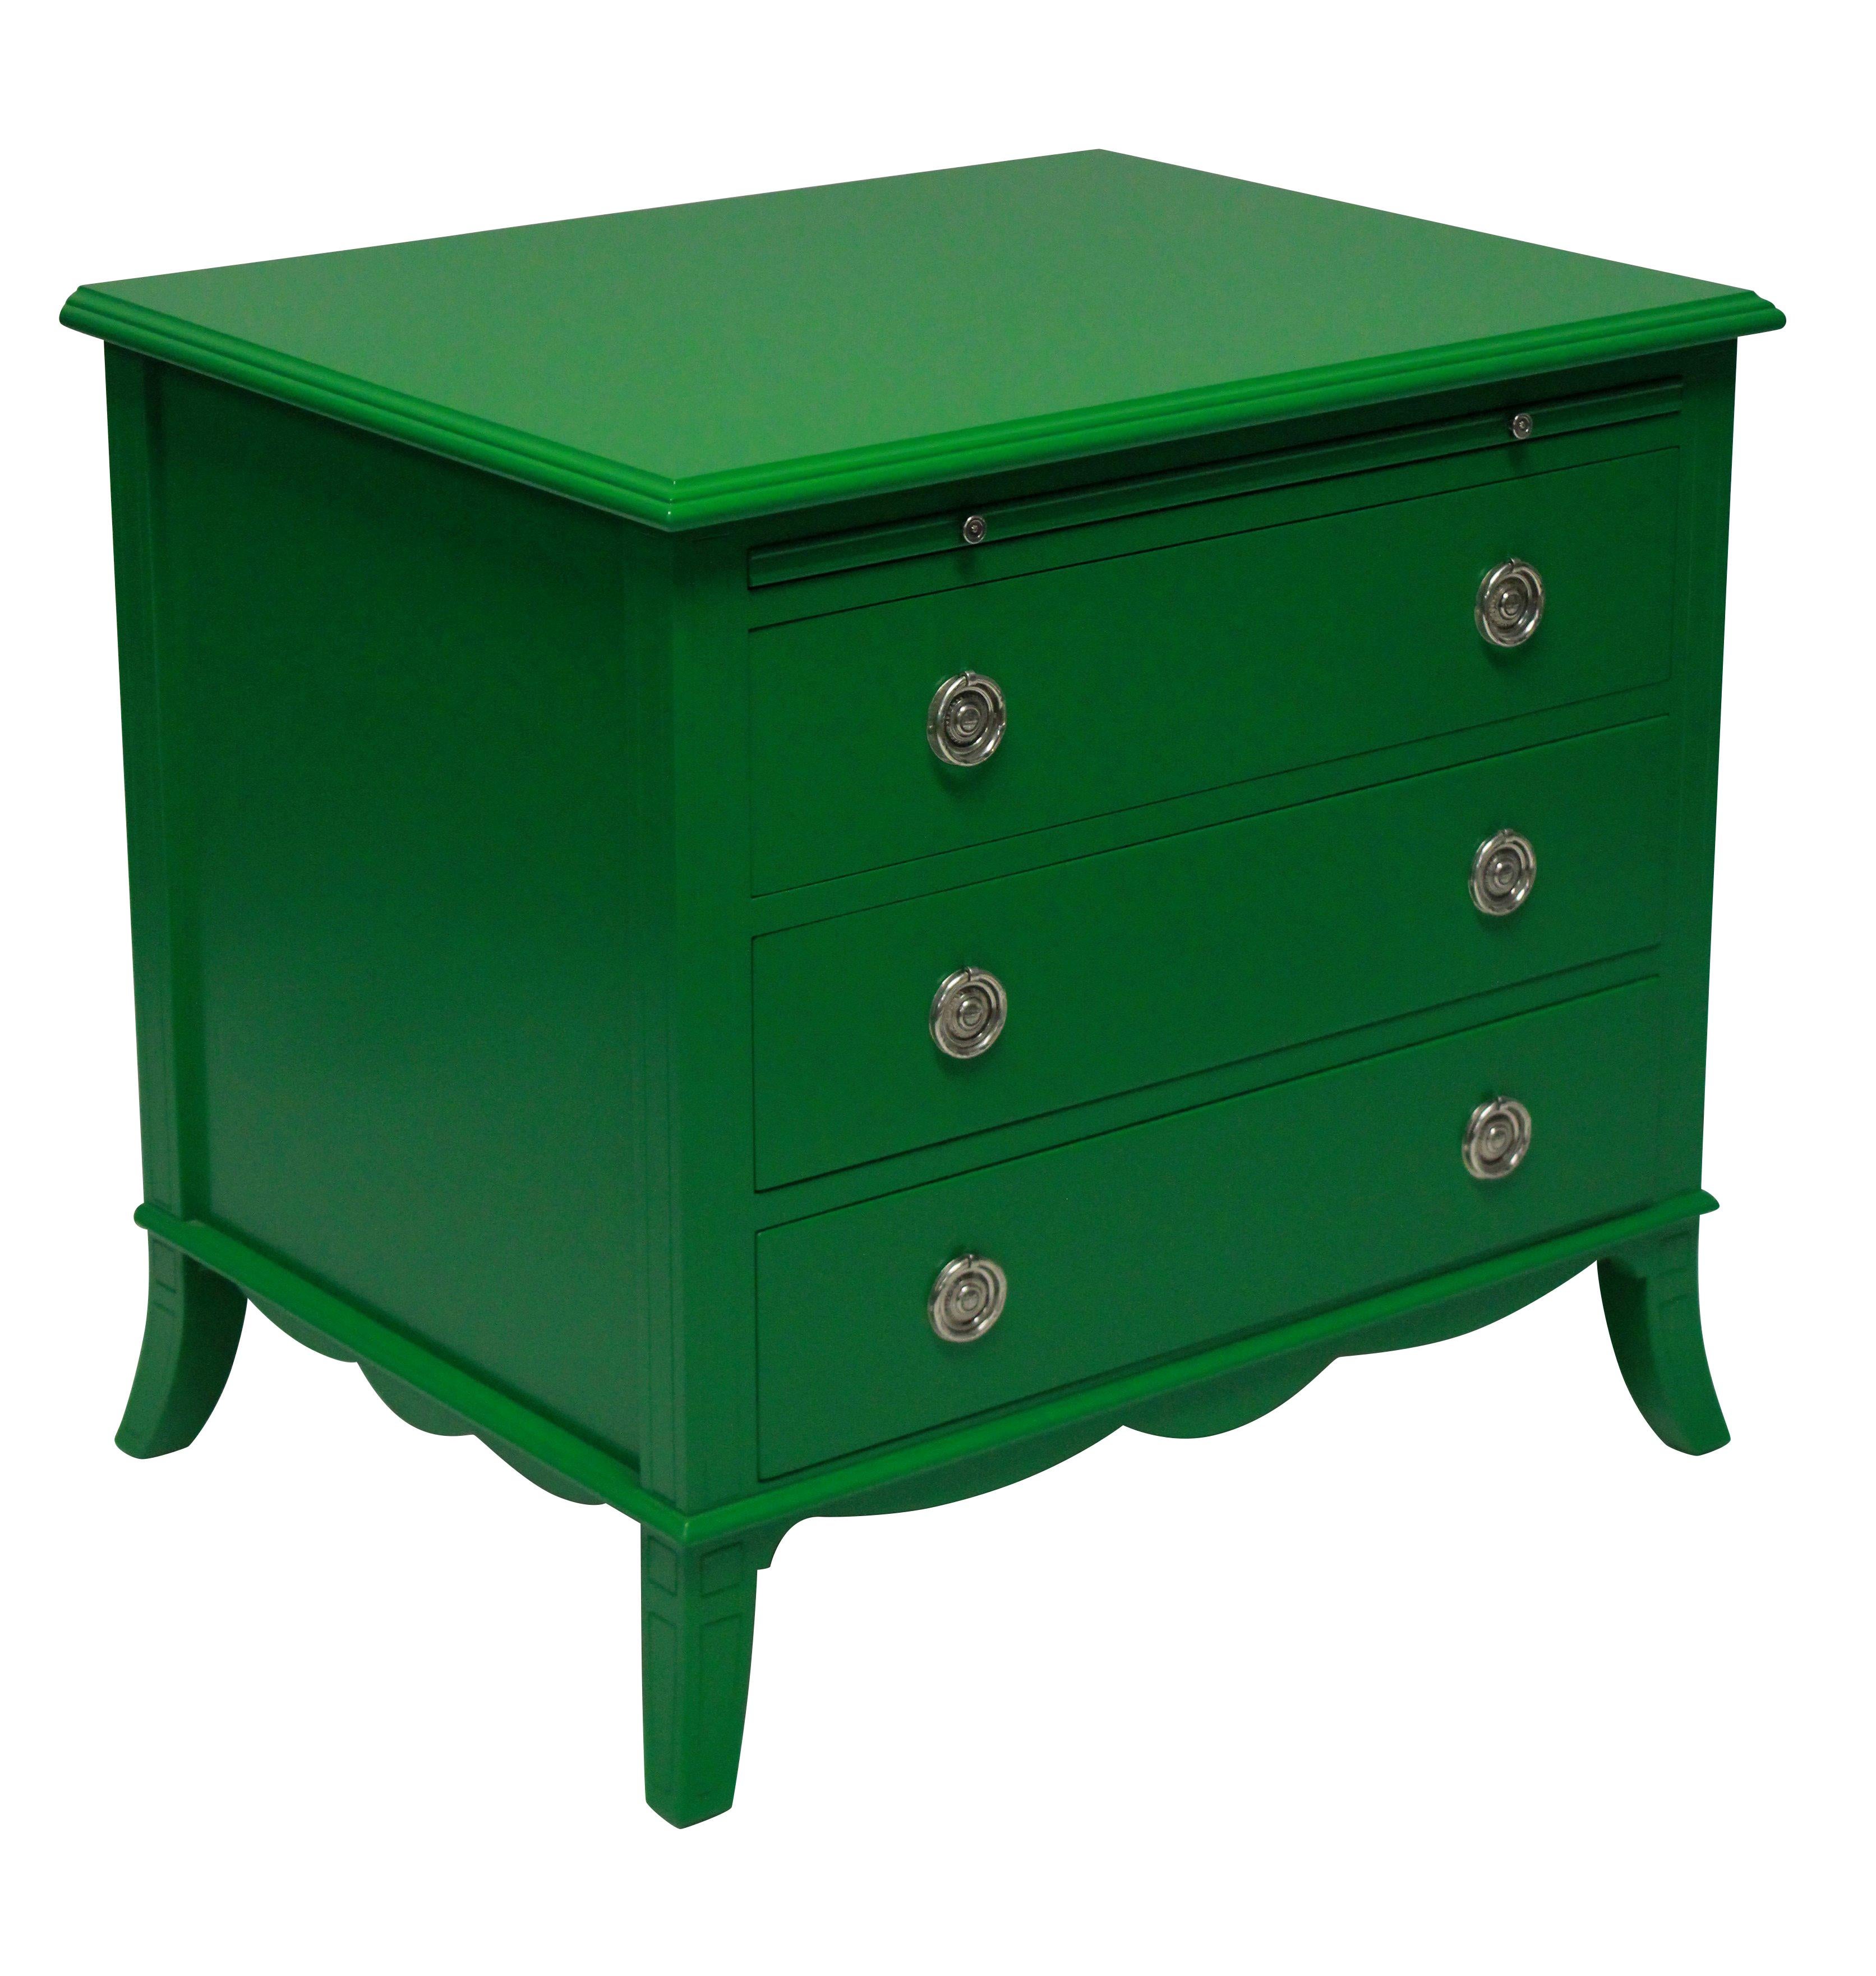 A pair of chests in green lacquer in the manner of Dorothy Draper, each with three drawers and a deep leather brushing slide. The handles of silver plate and good quality.

   